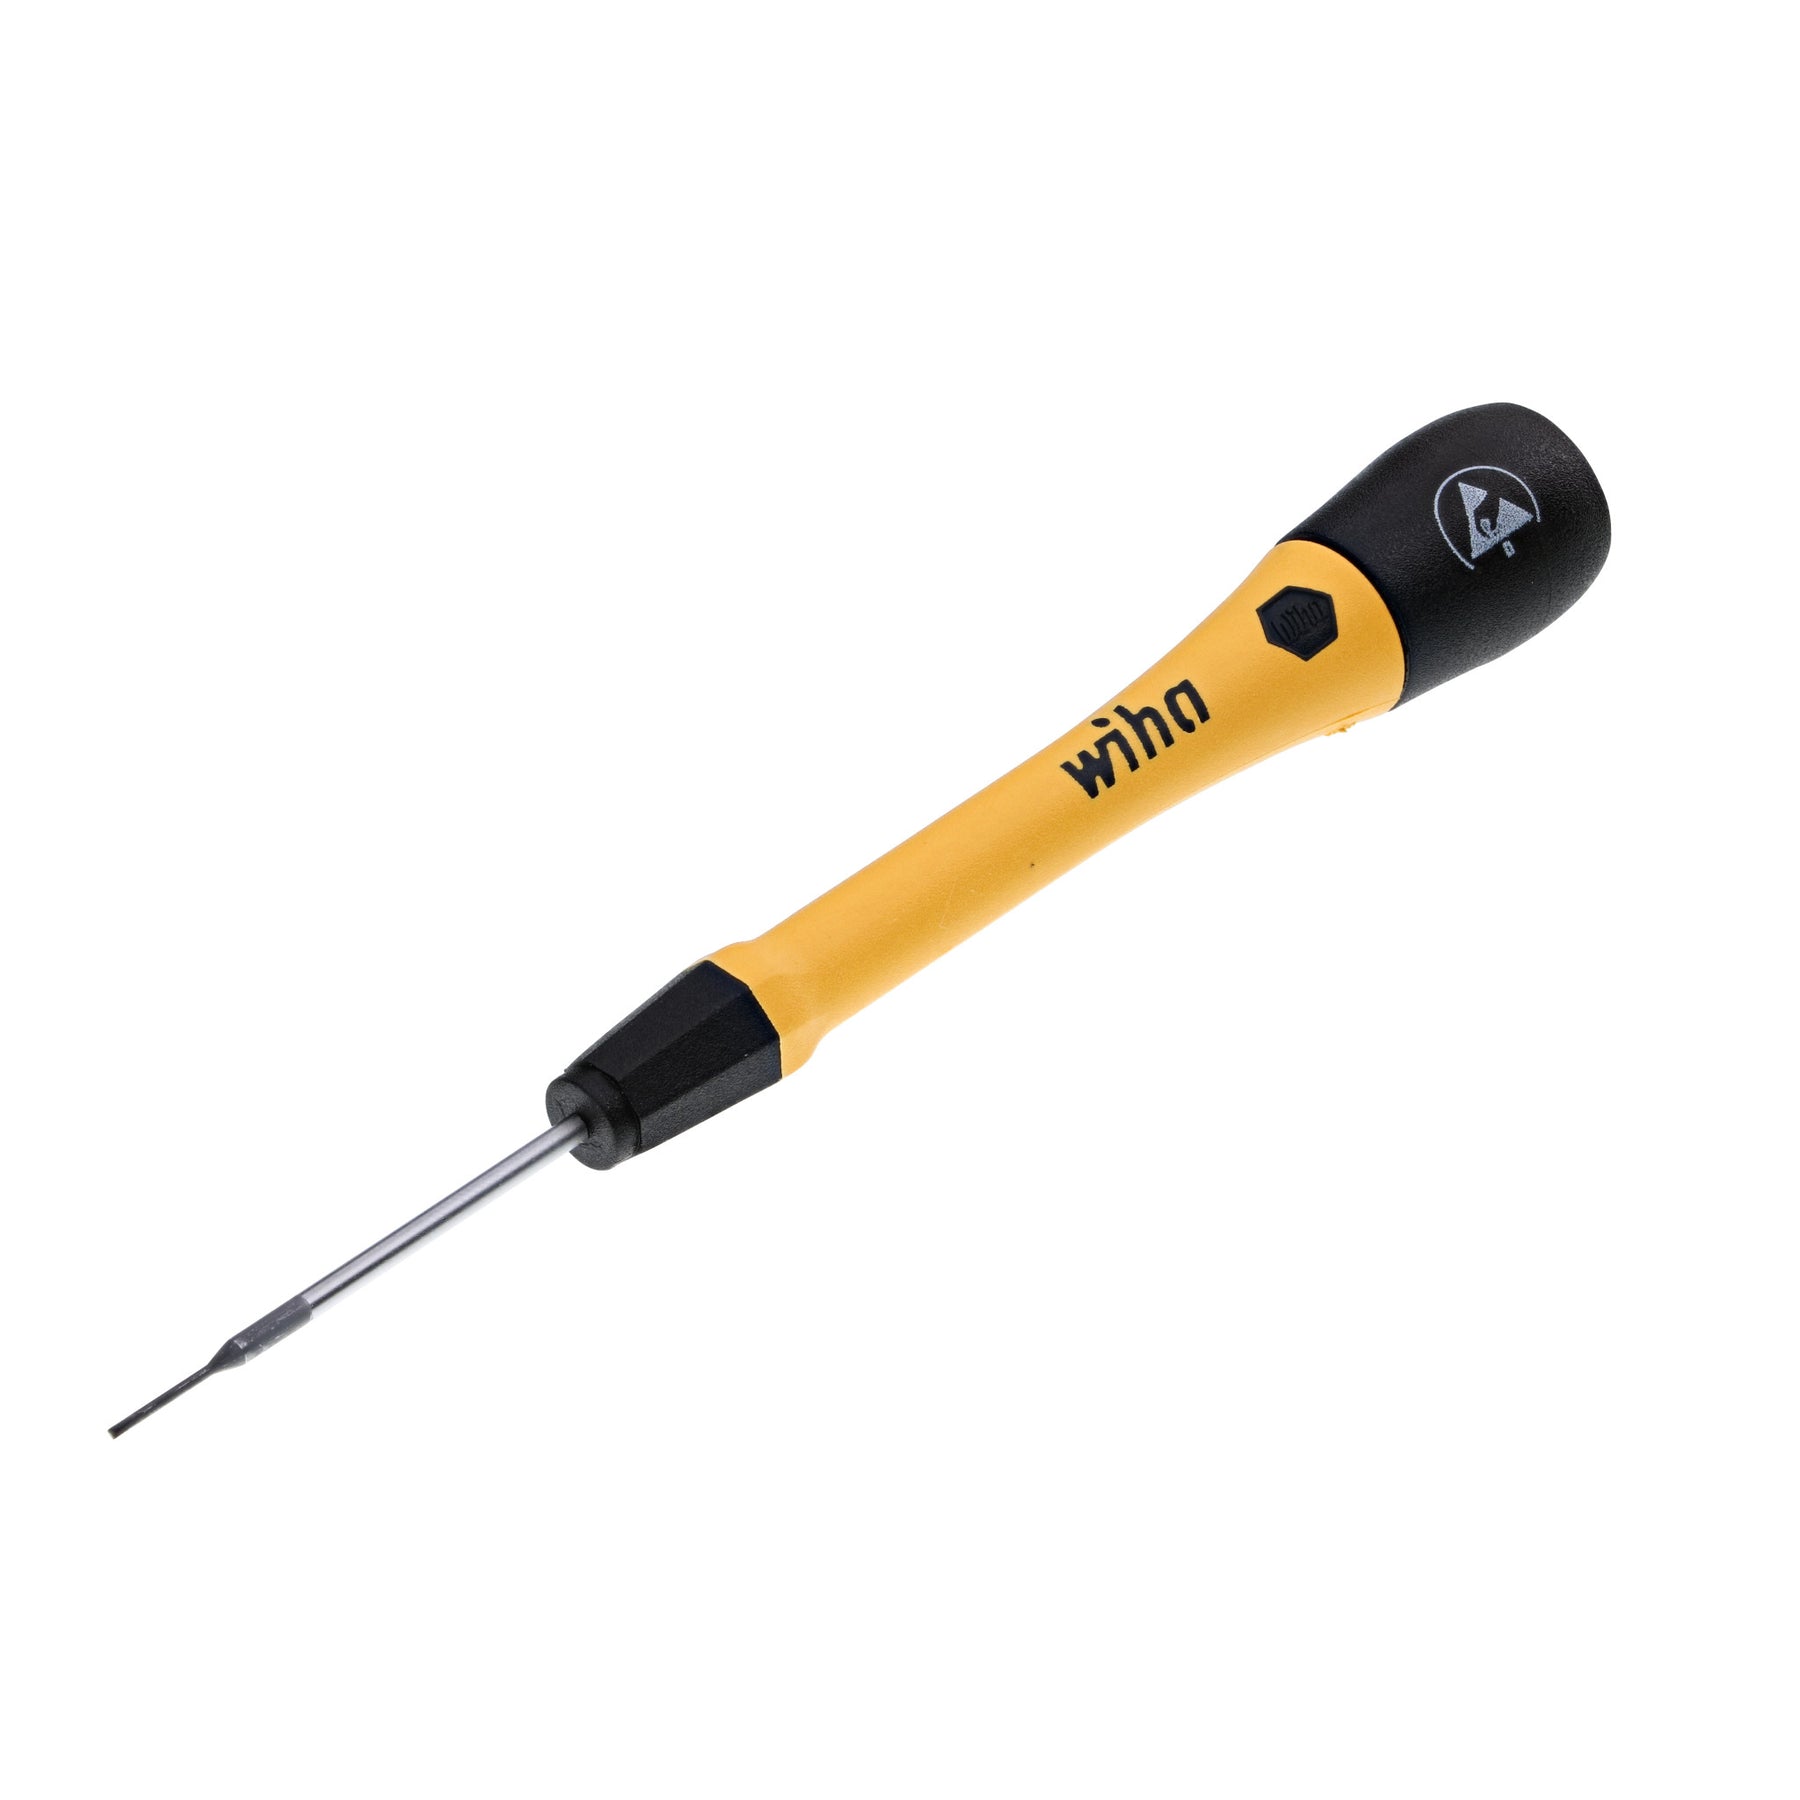 ESD Safe PicoFinish Precision Screwdriver - Slotted .8mm x 40mm